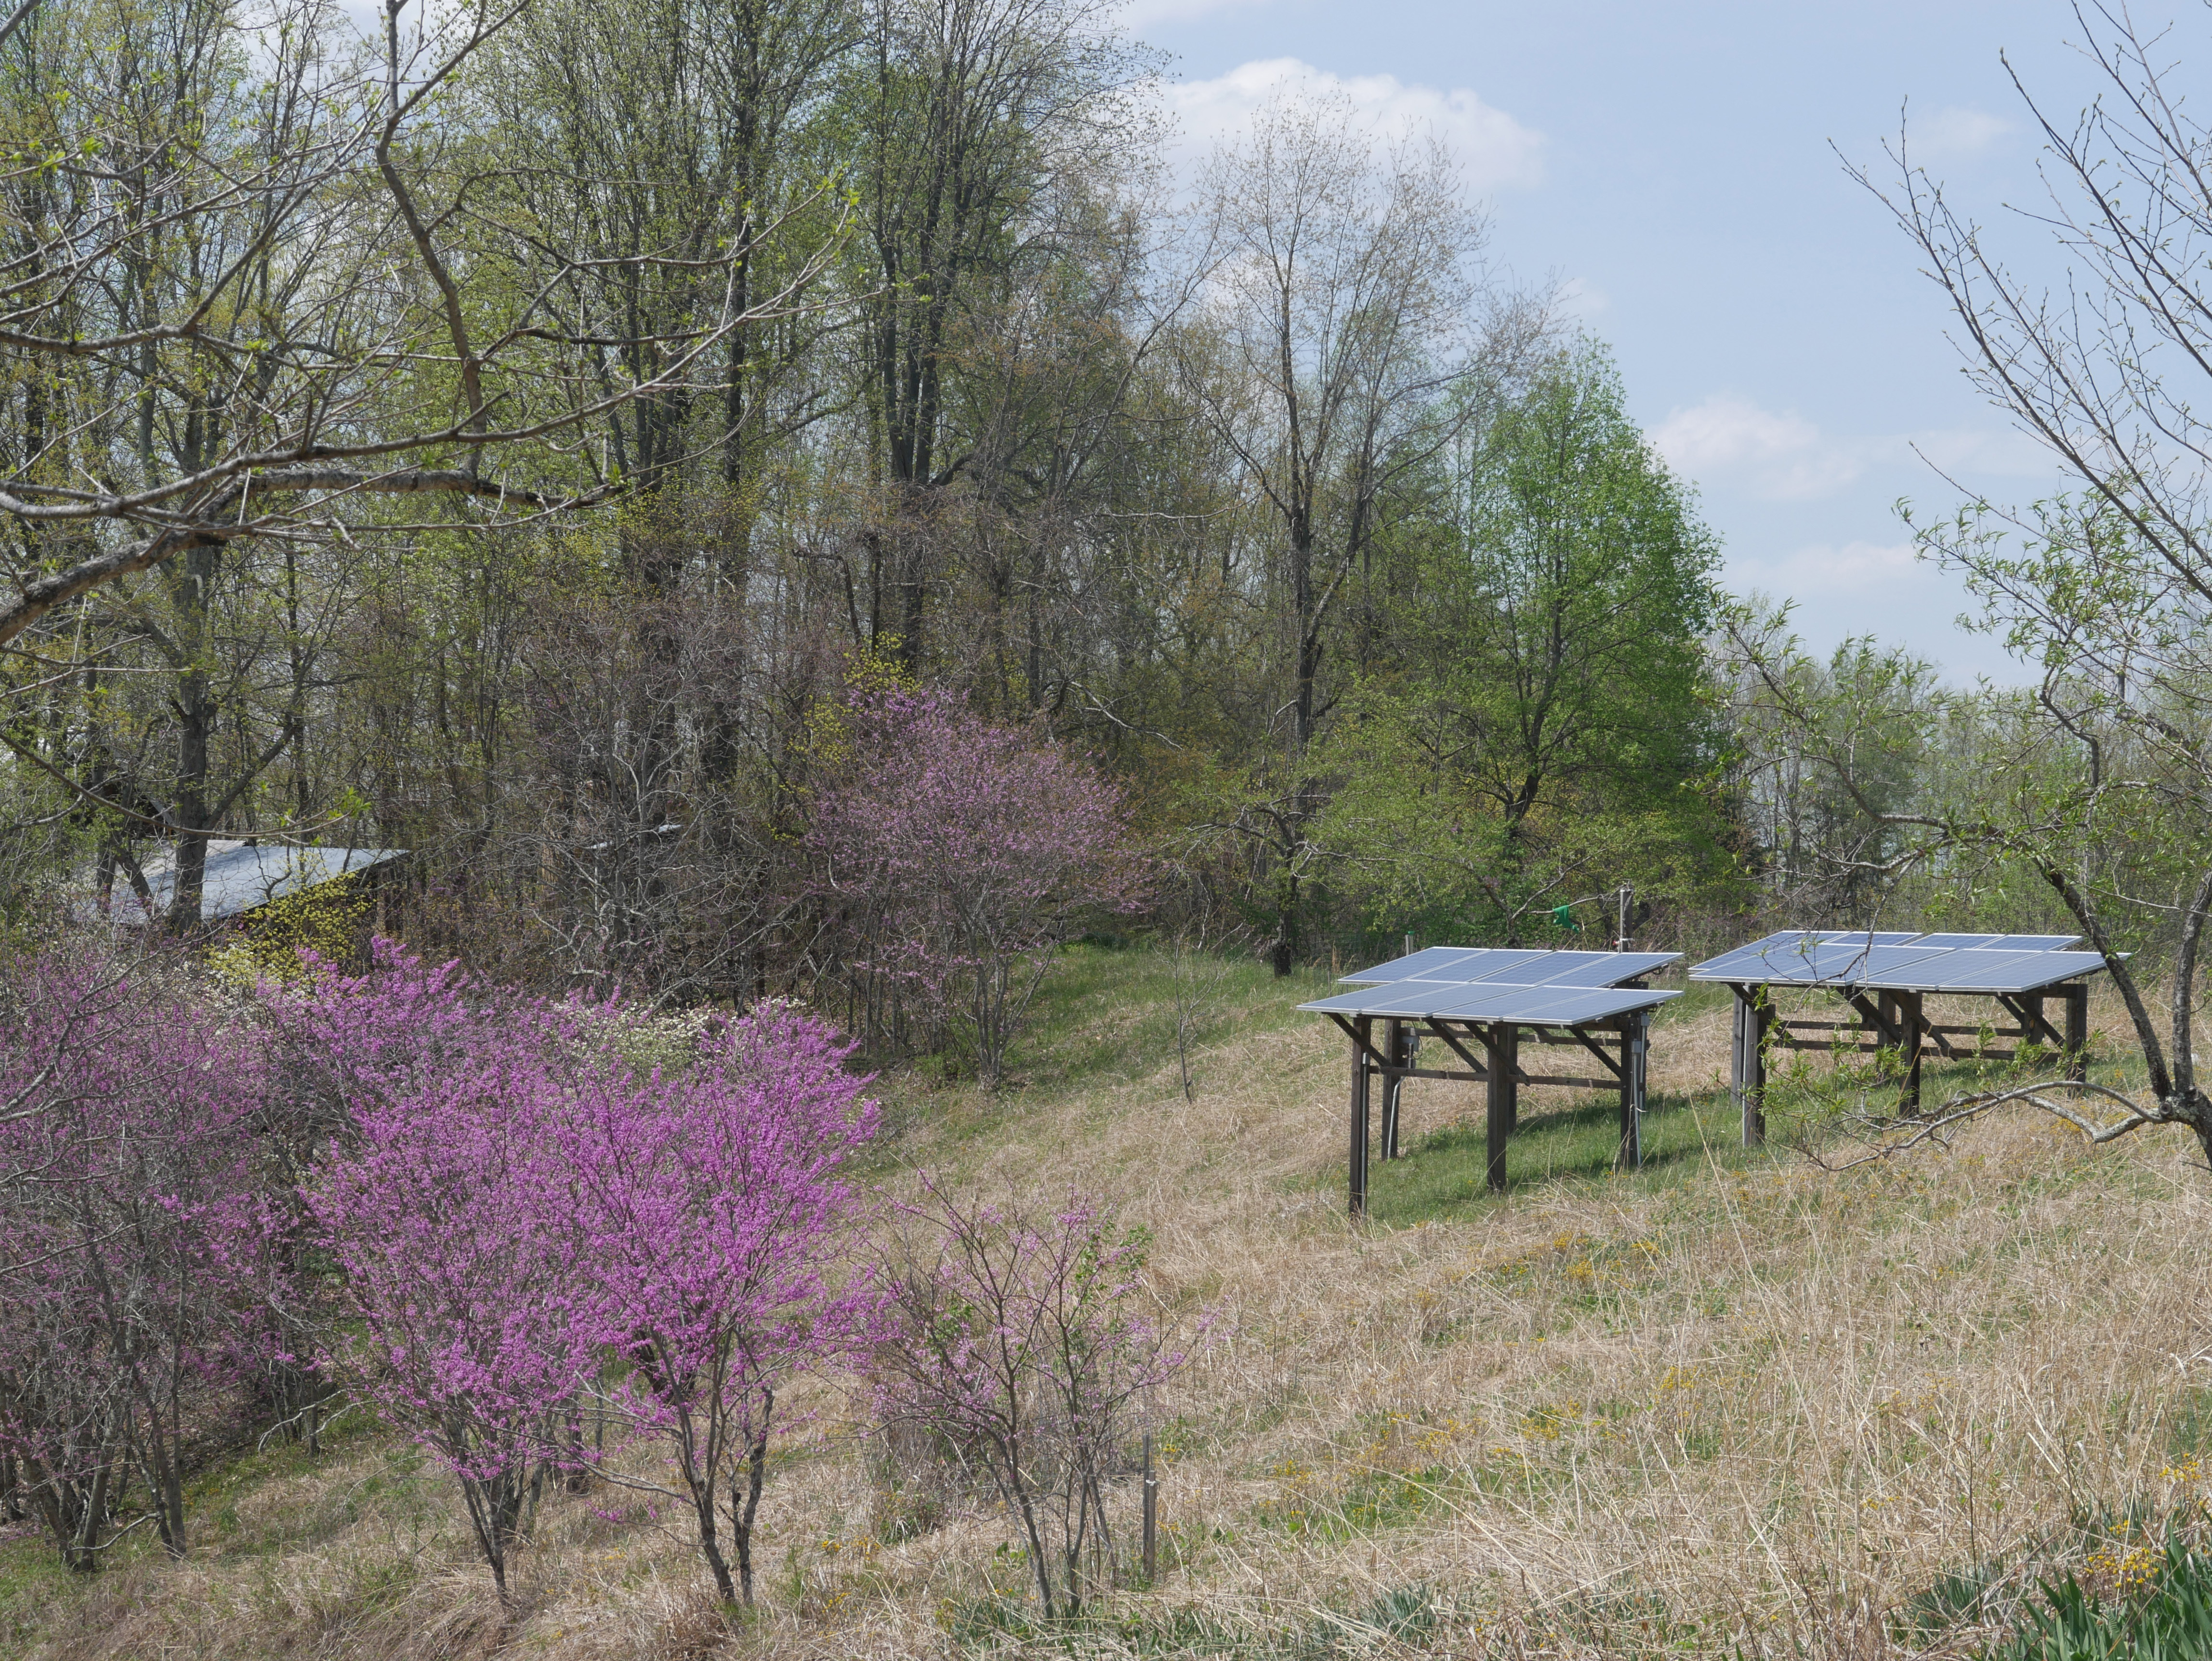 redbuds and solar panels